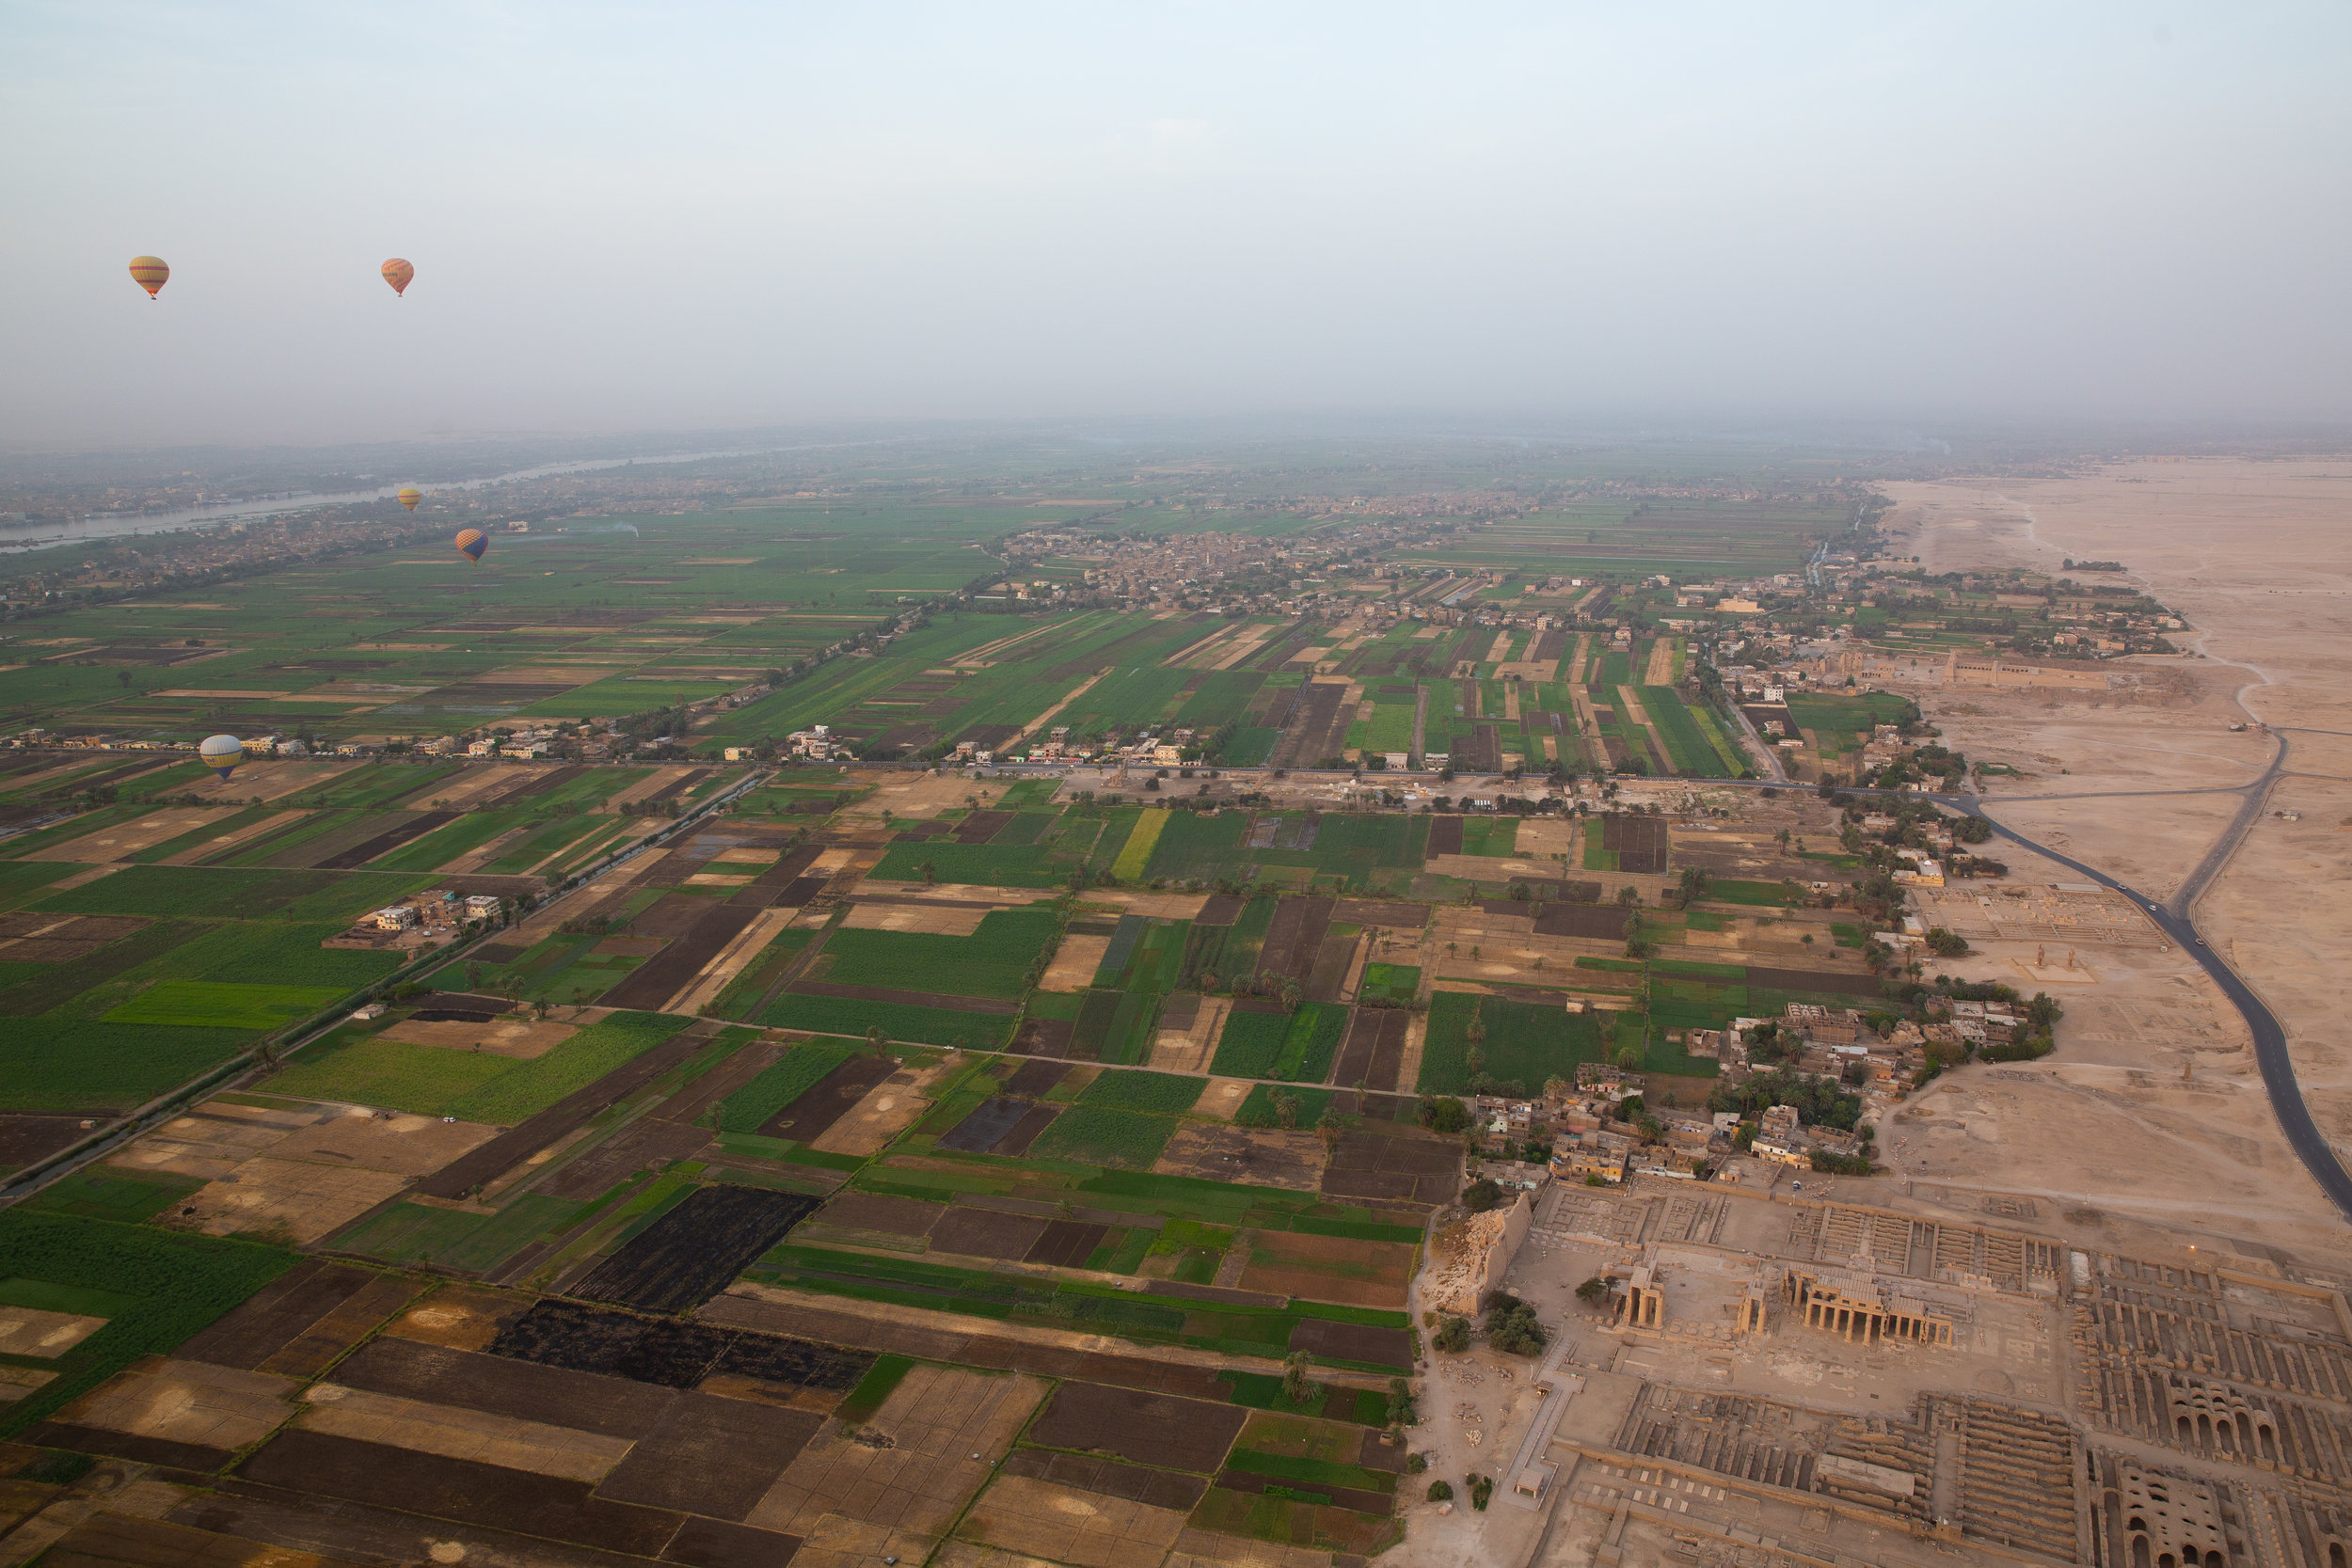 Hot Air Balloon over Luxor - Egypt - Wild Earth Expeditions